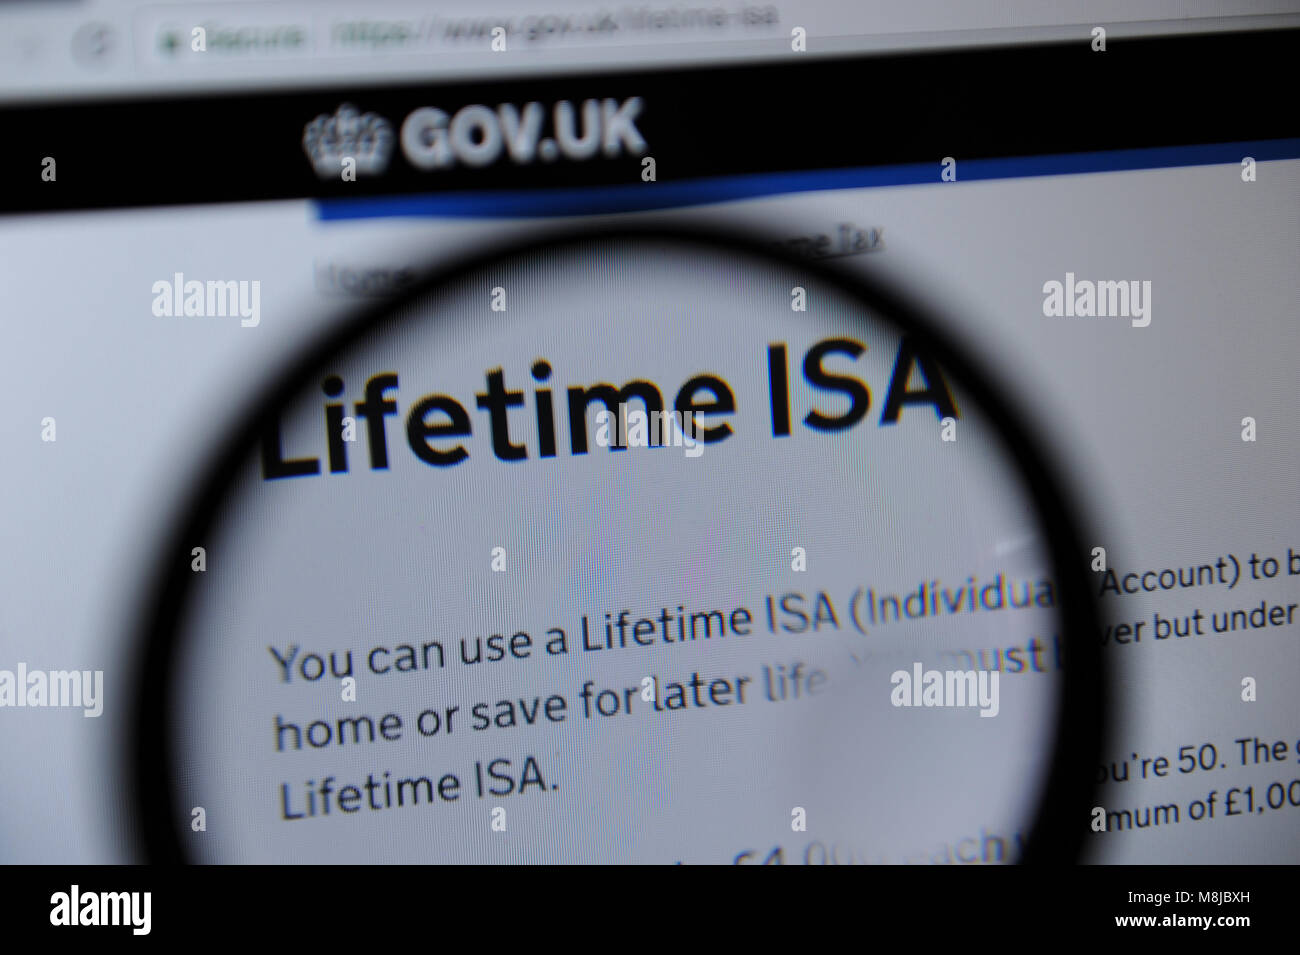 Lifetime ISA details on the UK Government website Stock Photo